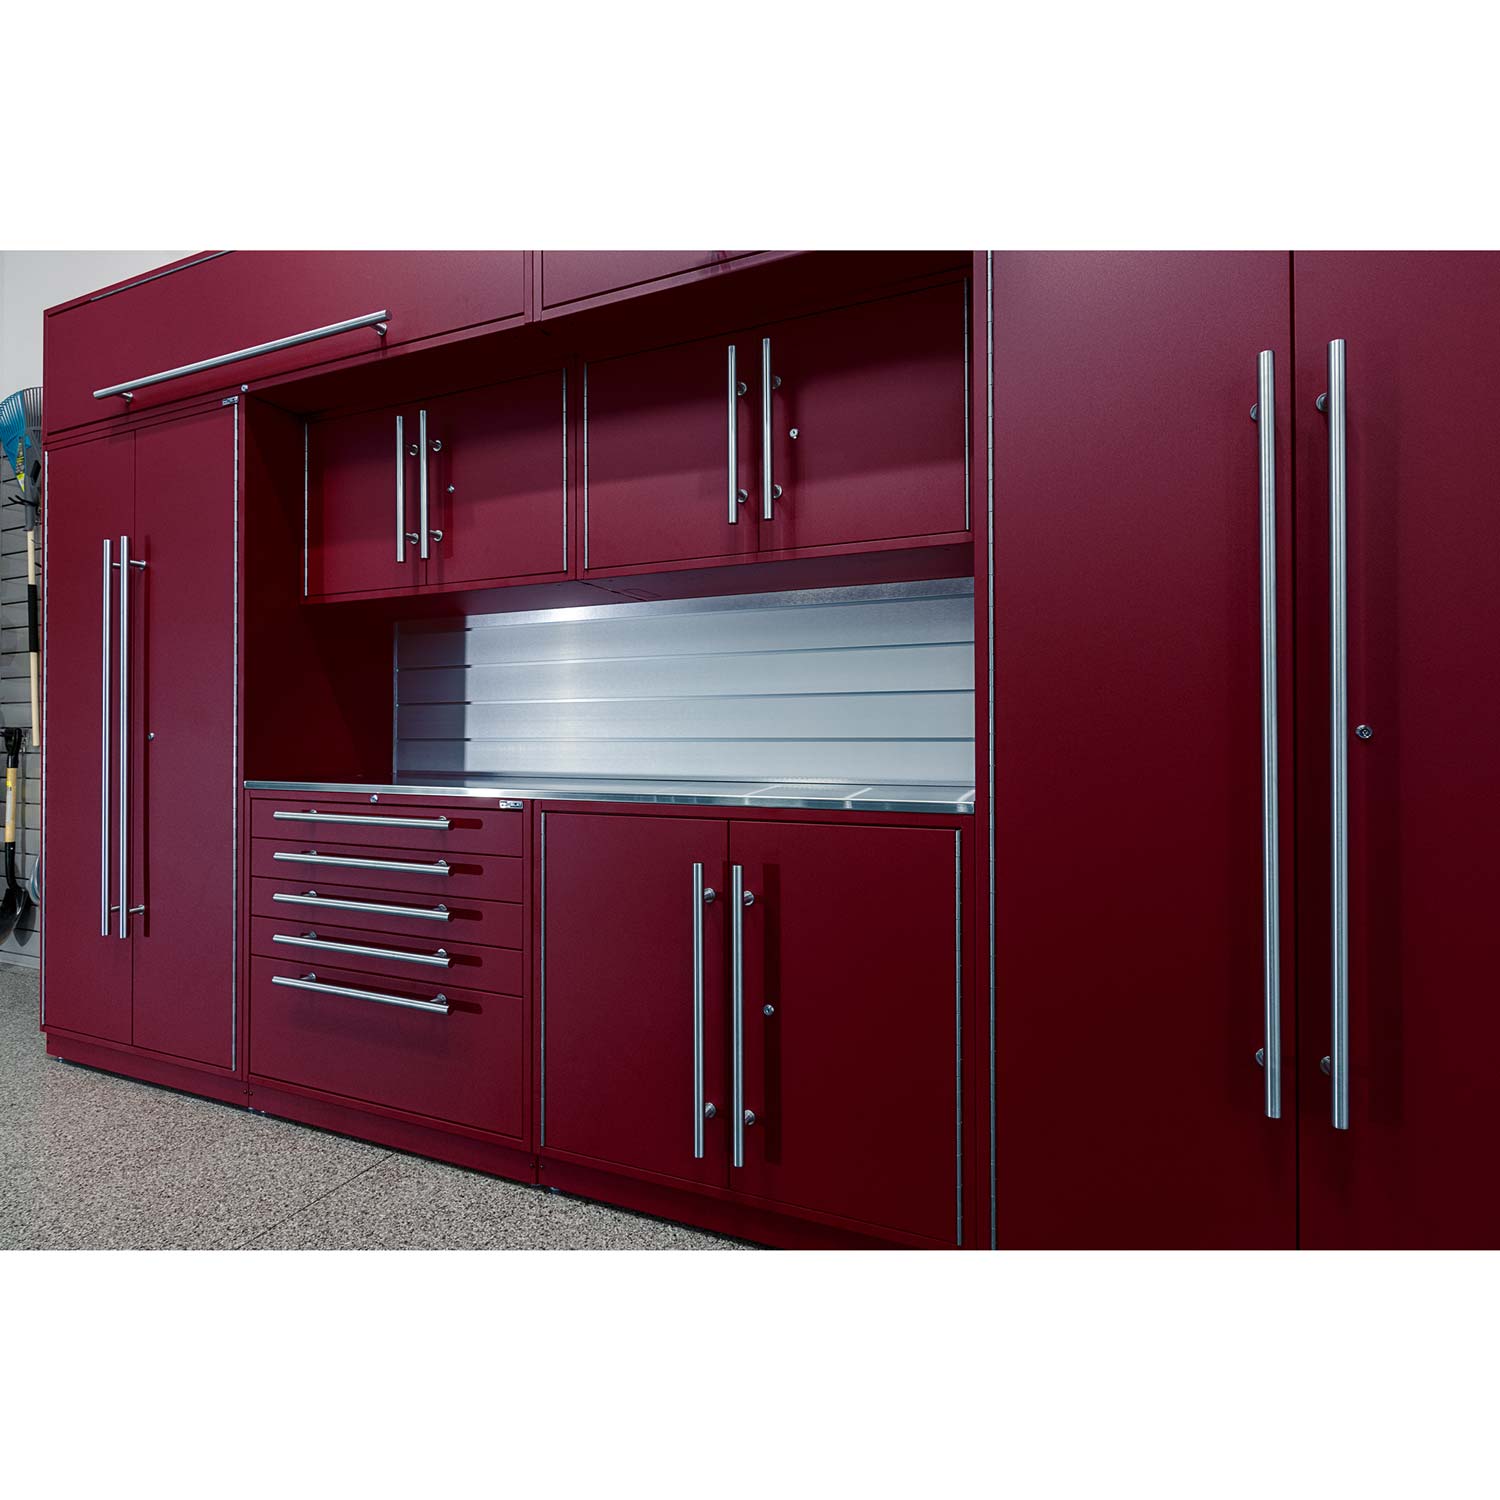 LUX Cabinets – 13 ft set – MAX